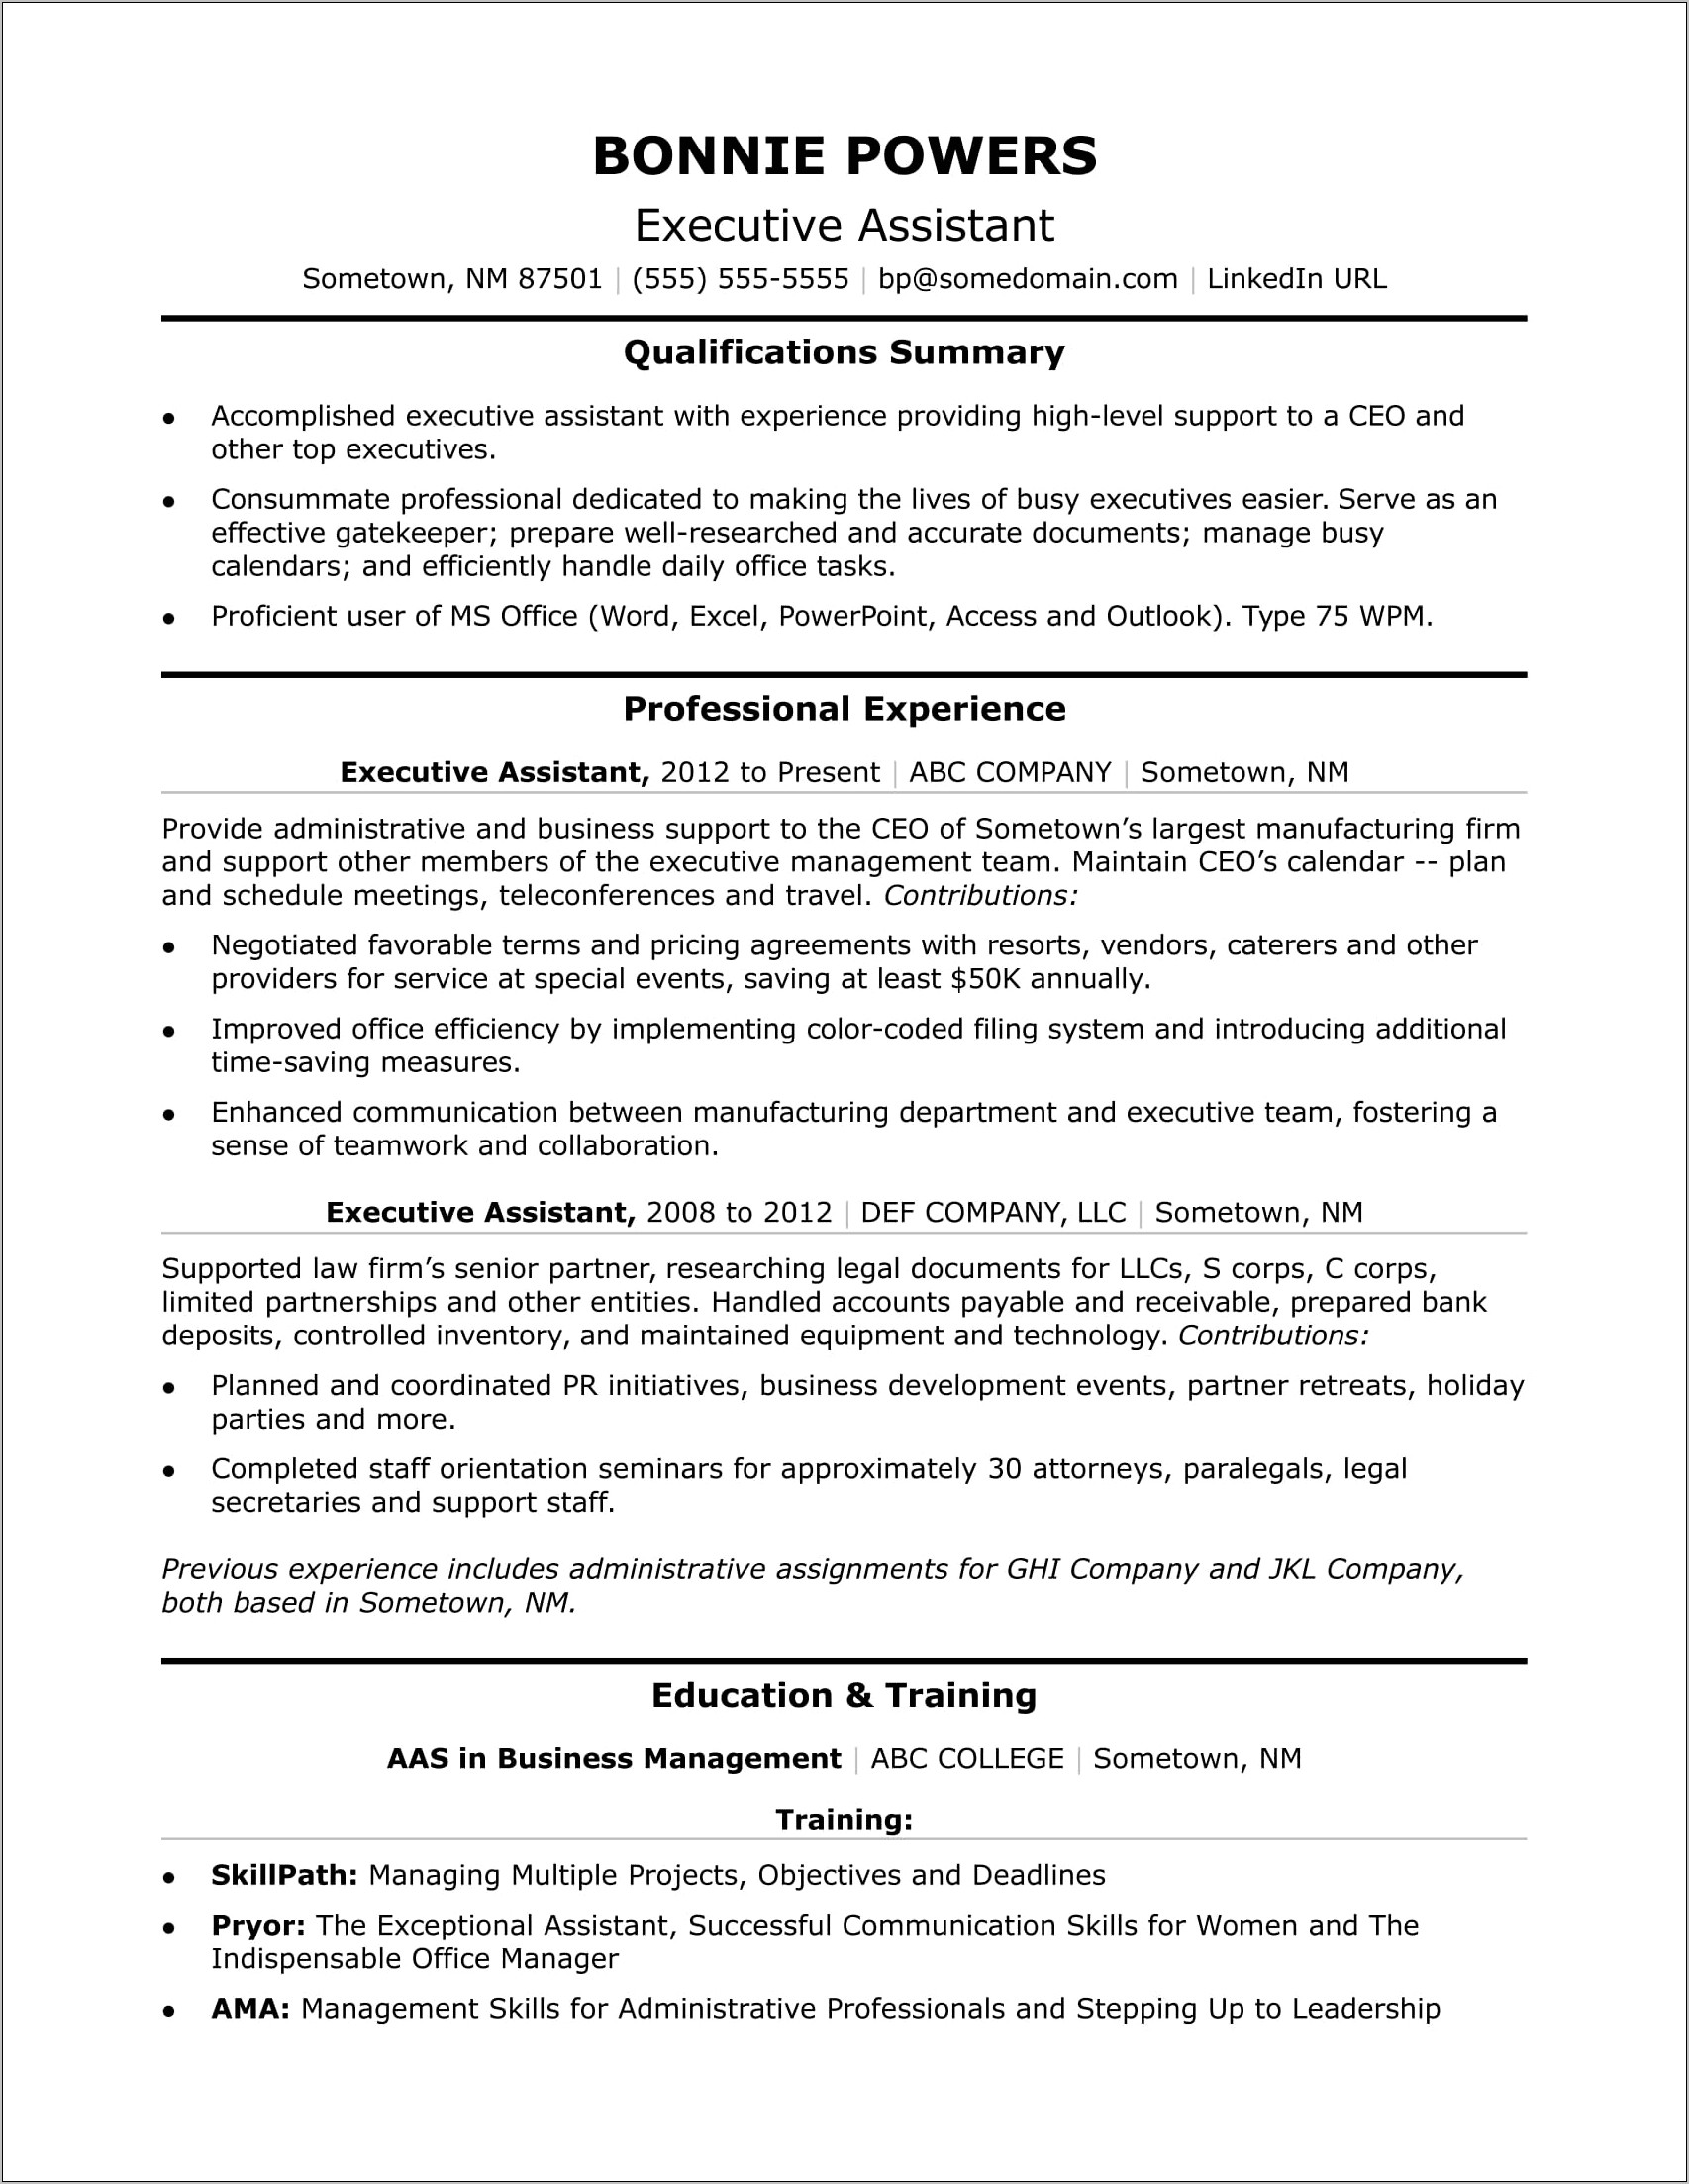 Skills And Abilities Job Objectives For Resumes